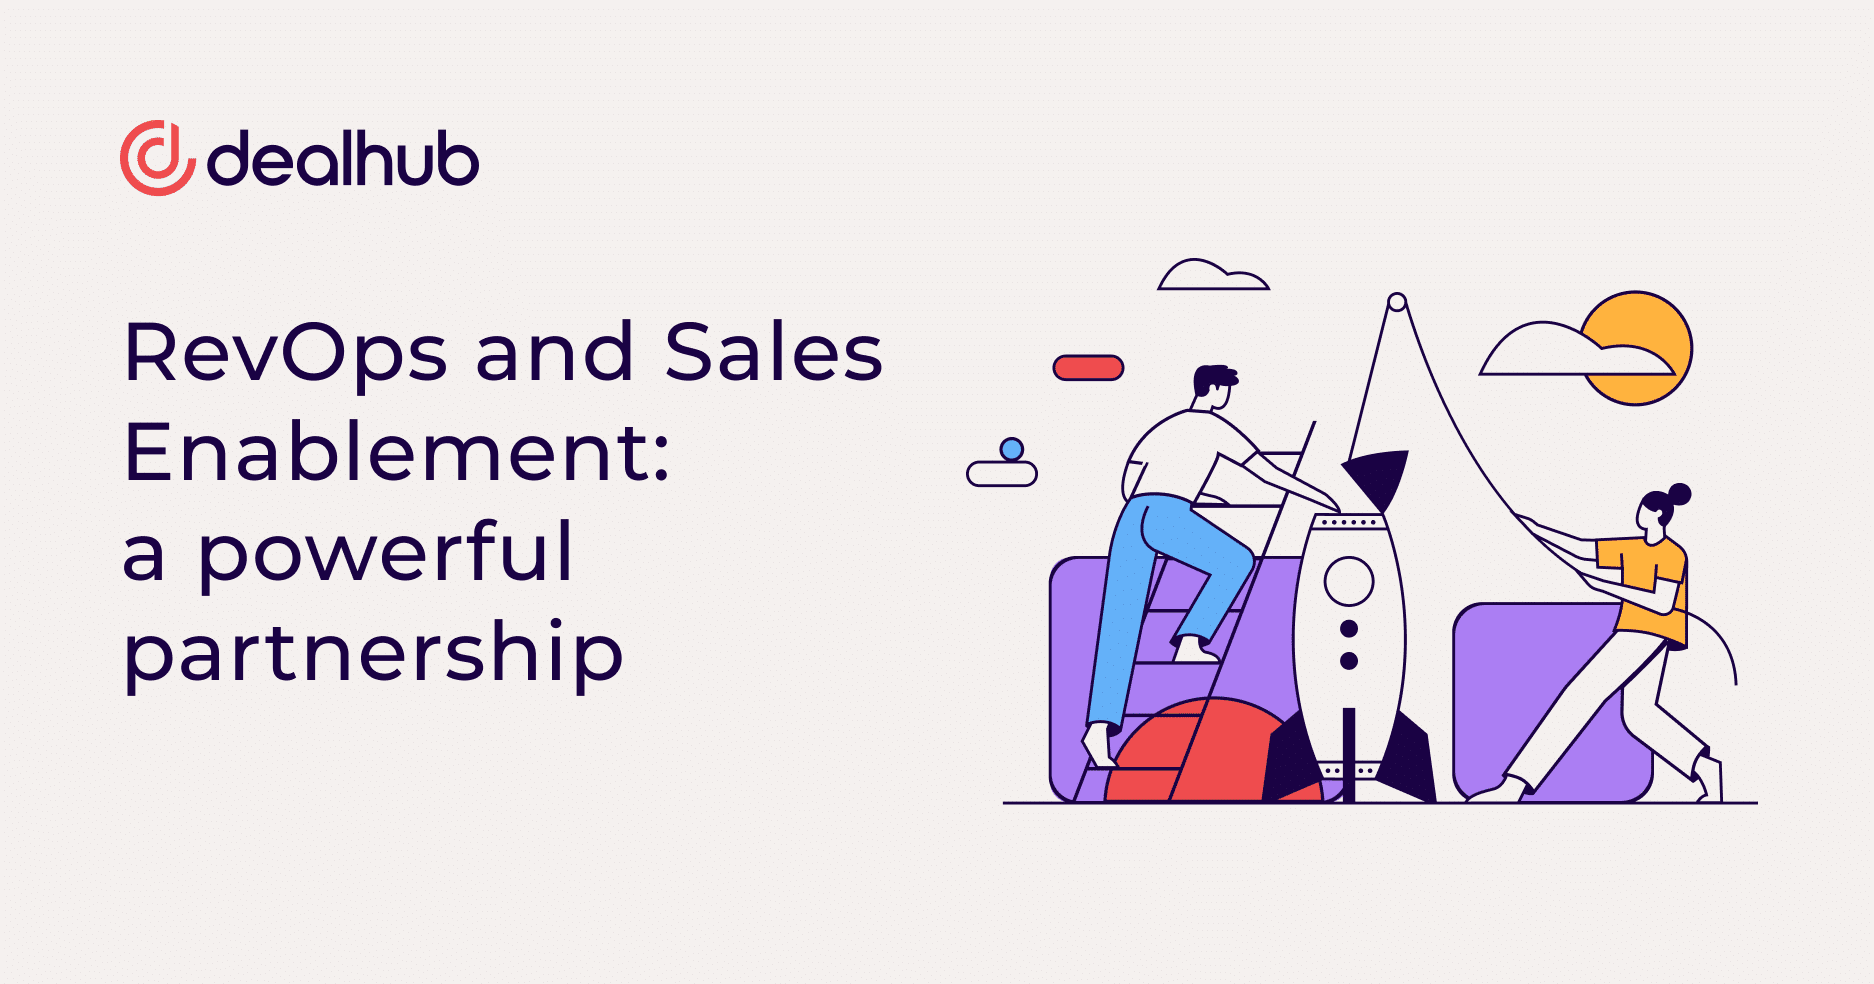 RevOps and Sales Enablement: a powerful partnership